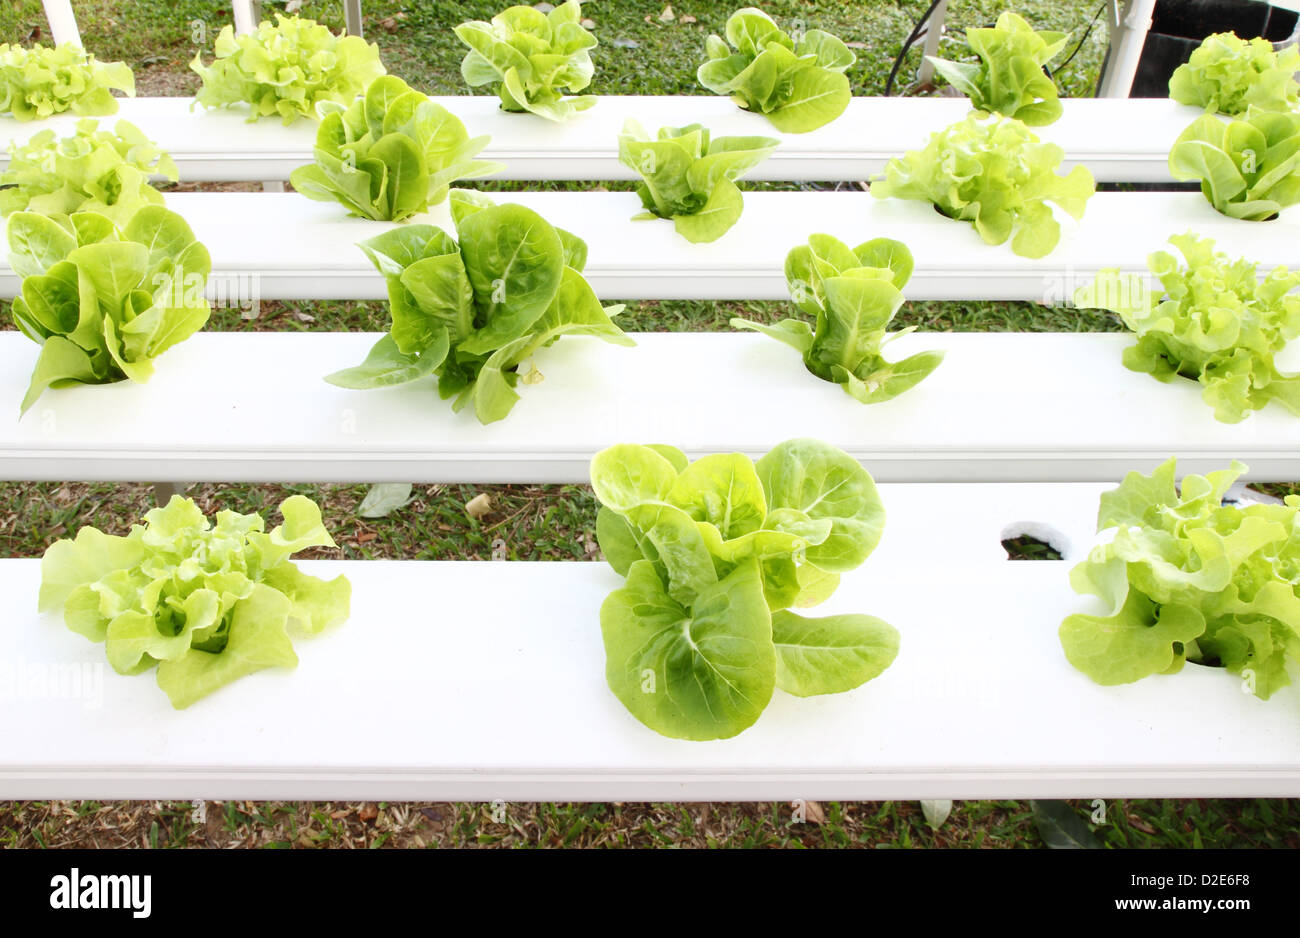 Hydroponic System Stock Photos &amp; Hydroponic System Stock ...